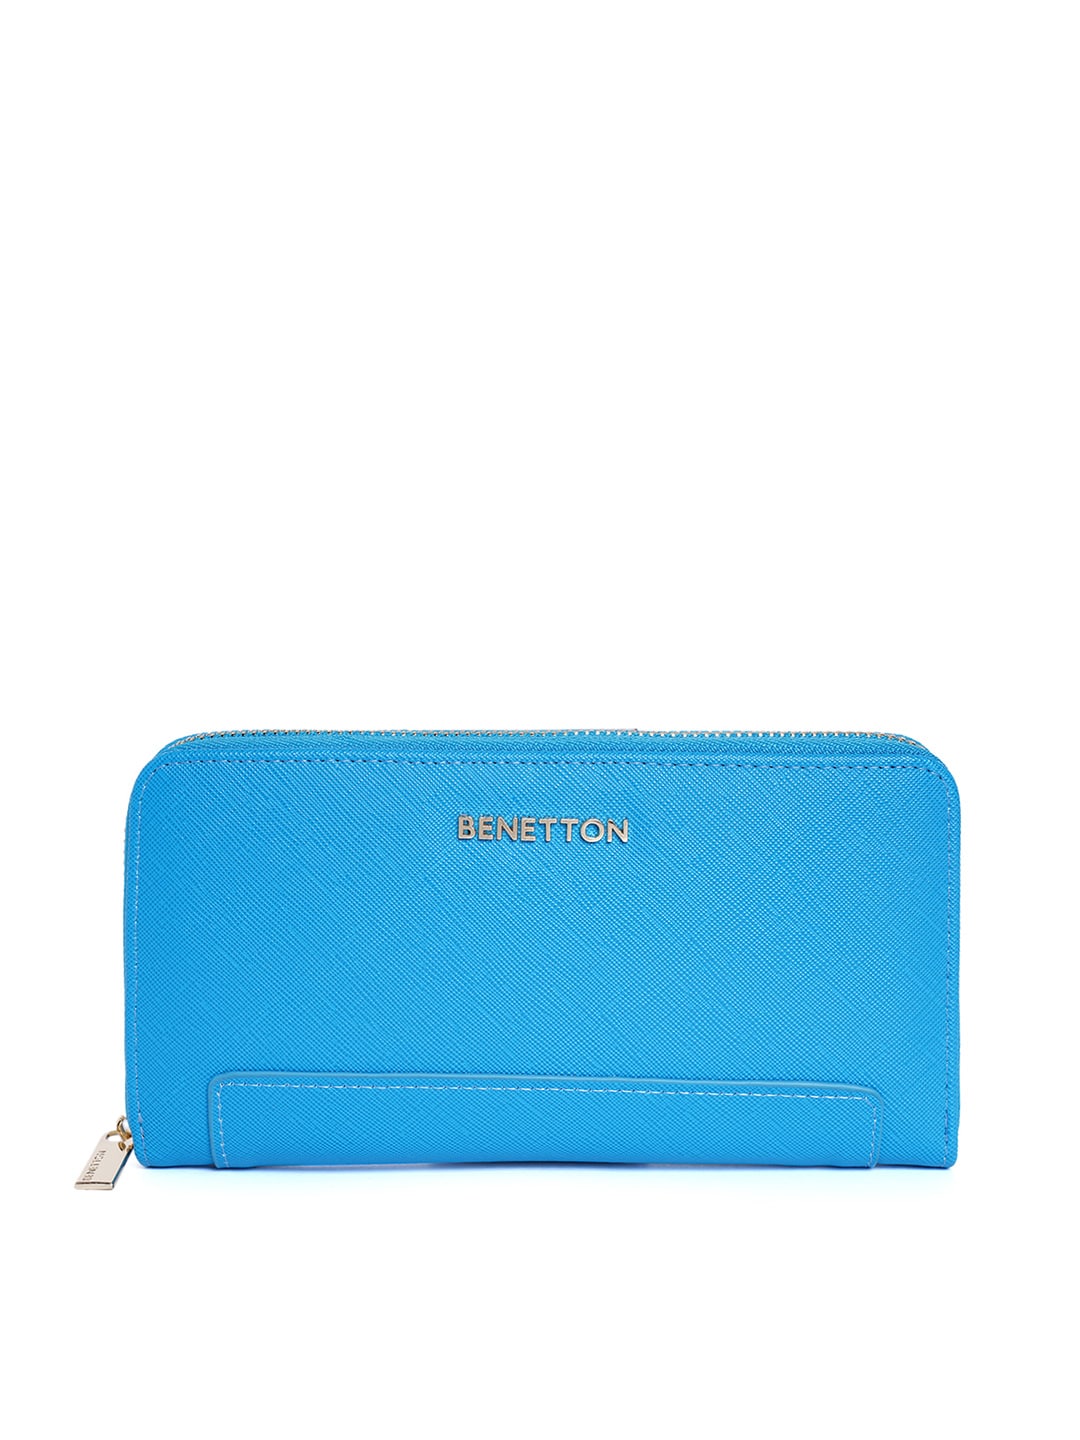 United Colors of Benetton Women Blue Solid Synthetic Leather Zip Around Wallet Price in India